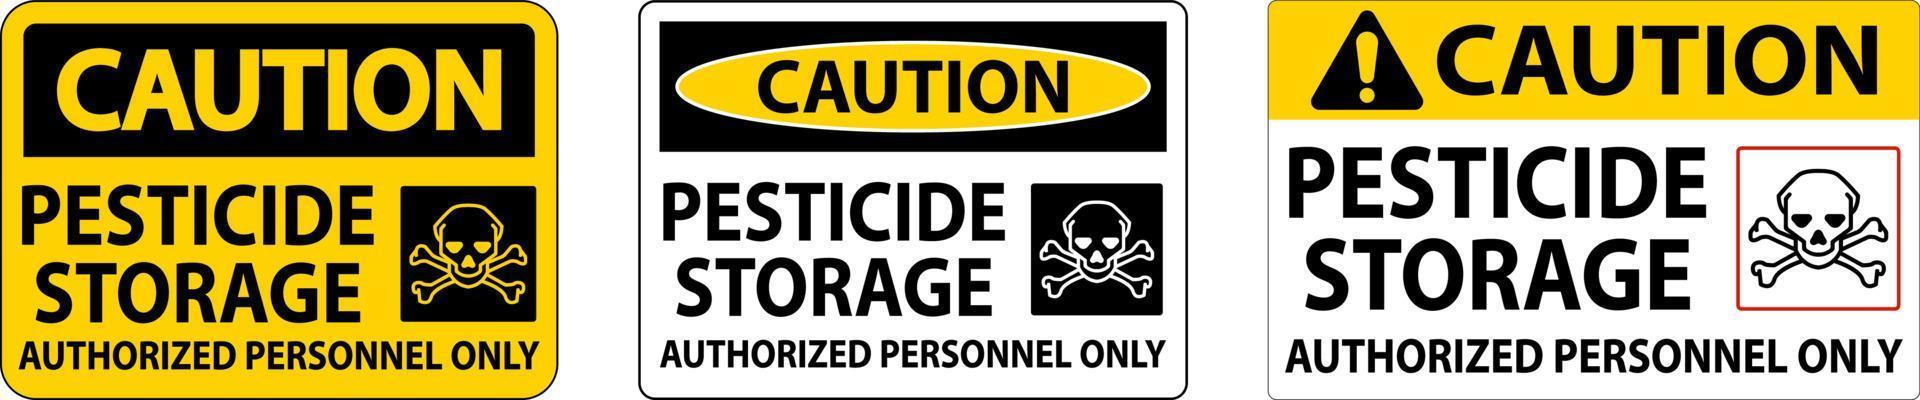 Caution Pesticide Storage Authorized Only Sign On White Background vector